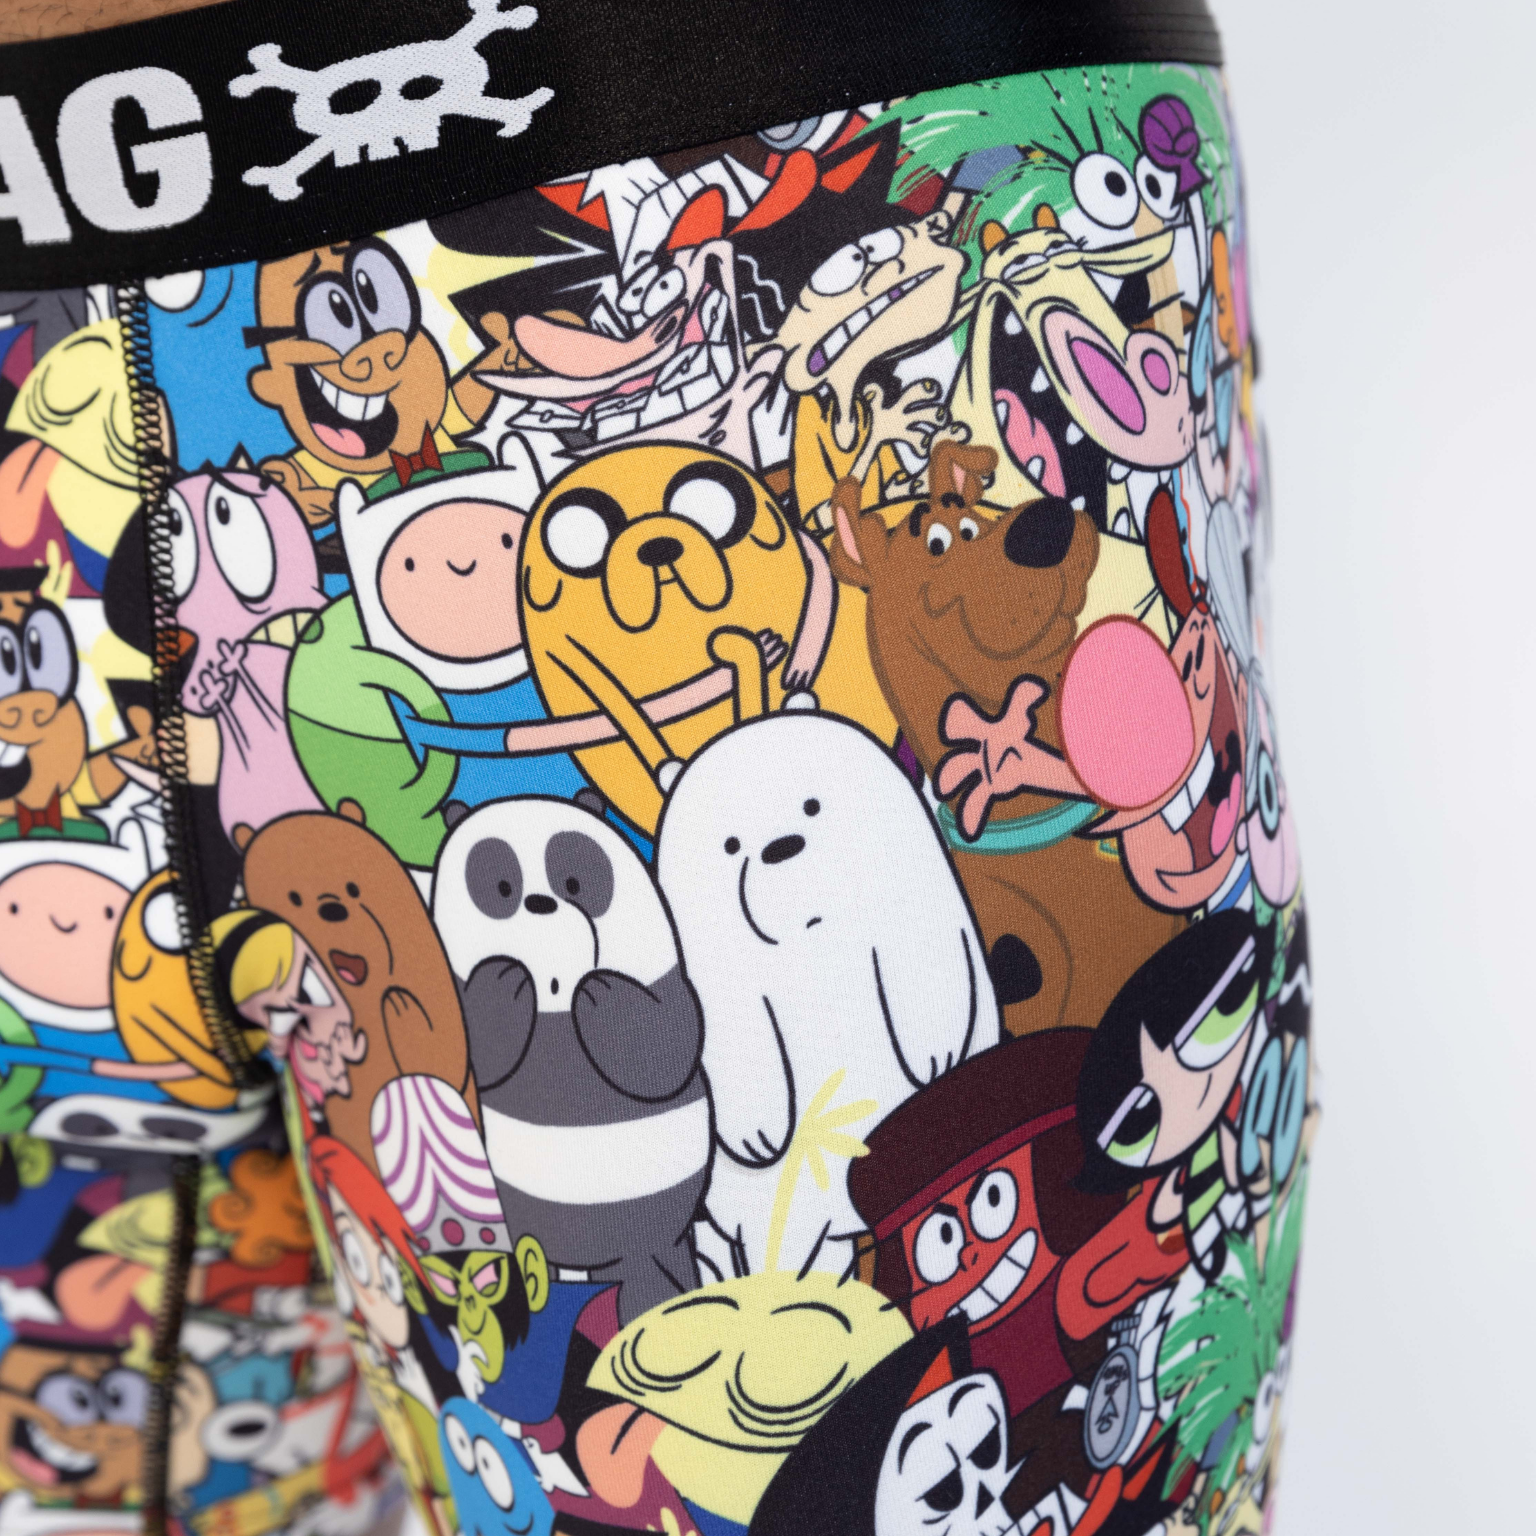 SWAG CARTOON NETWORK BOXERS - ALL CHARACTERS